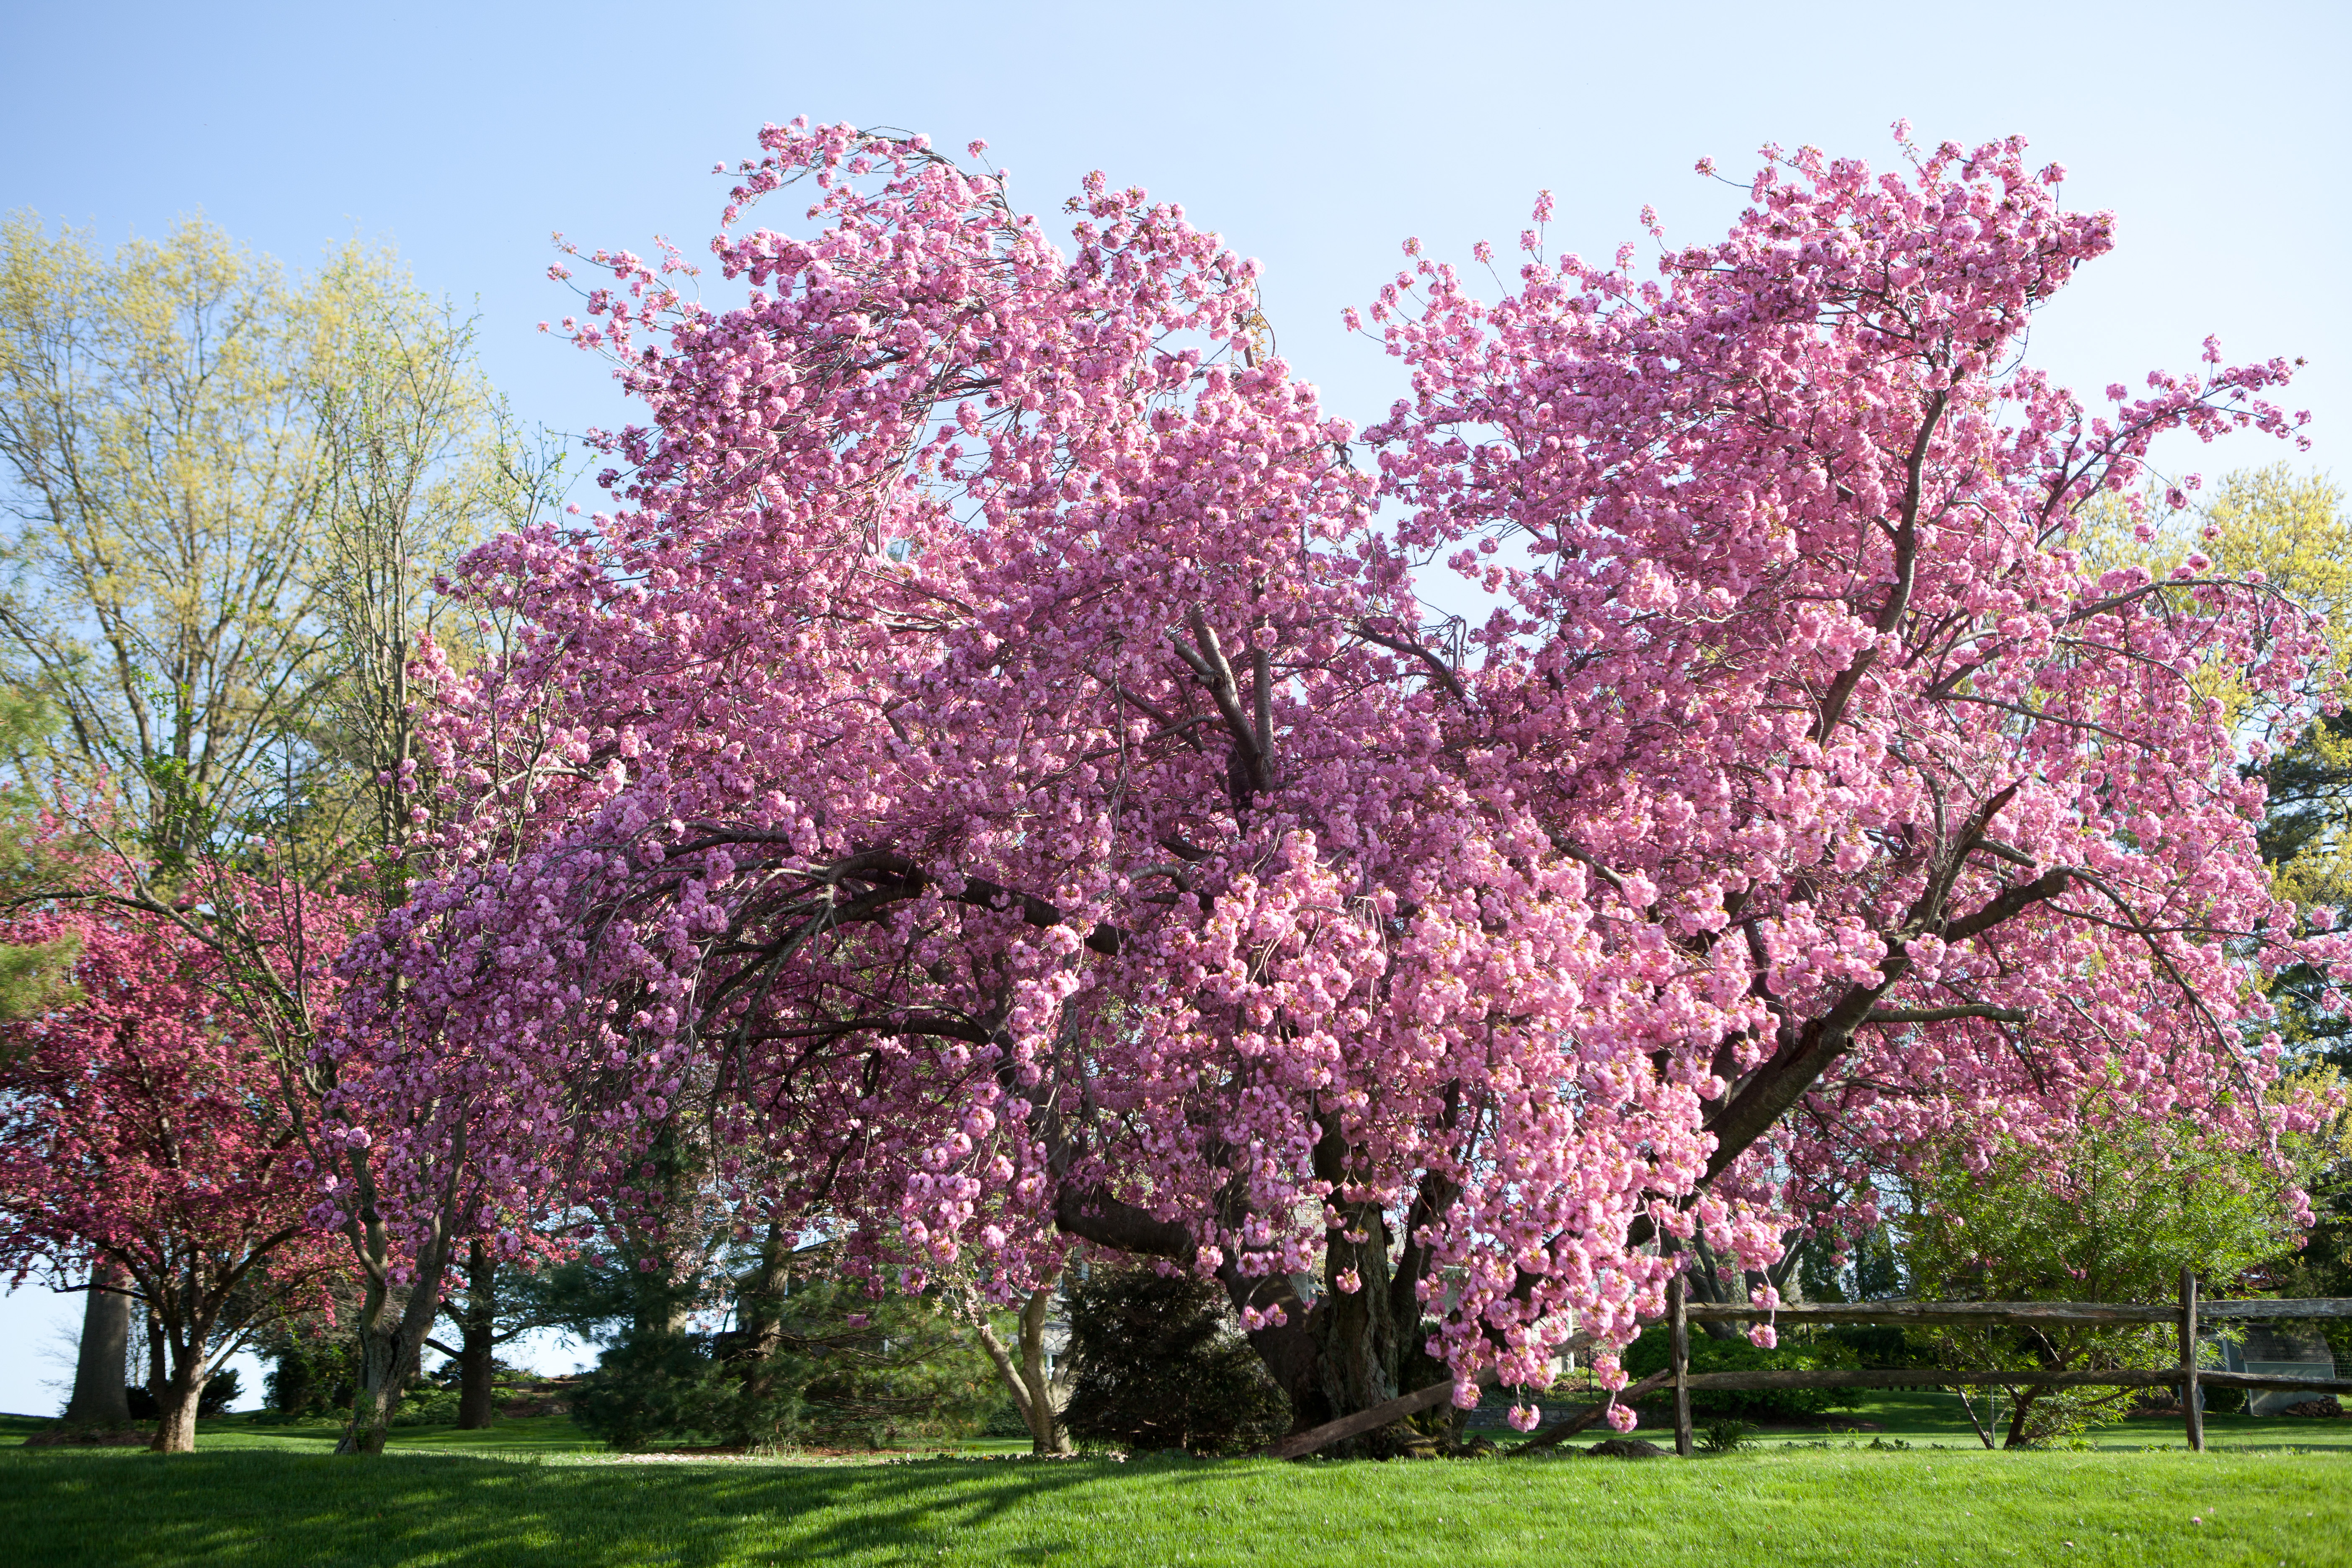 Our' pink tree, spring is here! | debrahorstphotography